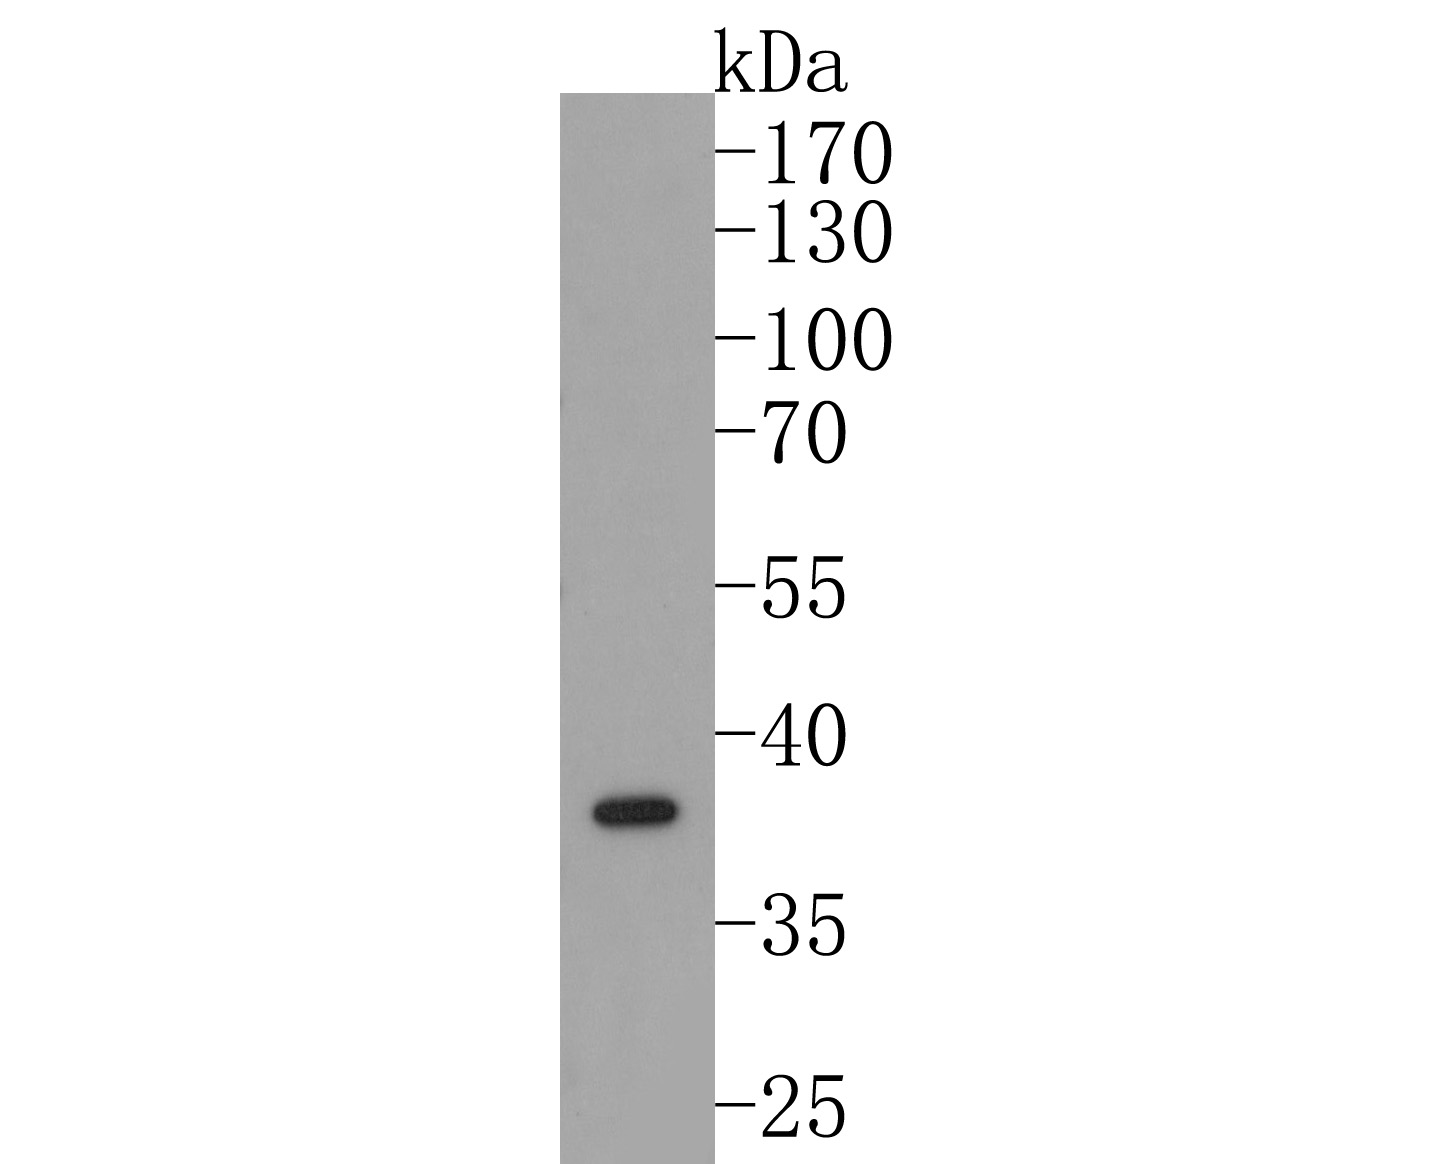 Western blot analysis of ALS2CR1 on HepG2 cell lysates. Proteins were transferred to a PVDF membrane and blocked with 5% BSA in PBS for 1 hour at room temperature. The primary antibody (HA720111, 1/500) was used in 5% BSA at room temperature for 2 hours. Goat Anti-Rabbit IgG - HRP Secondary Antibody (HA1001) at 1:200,000 dilution was used for 1 hour at room temperature.